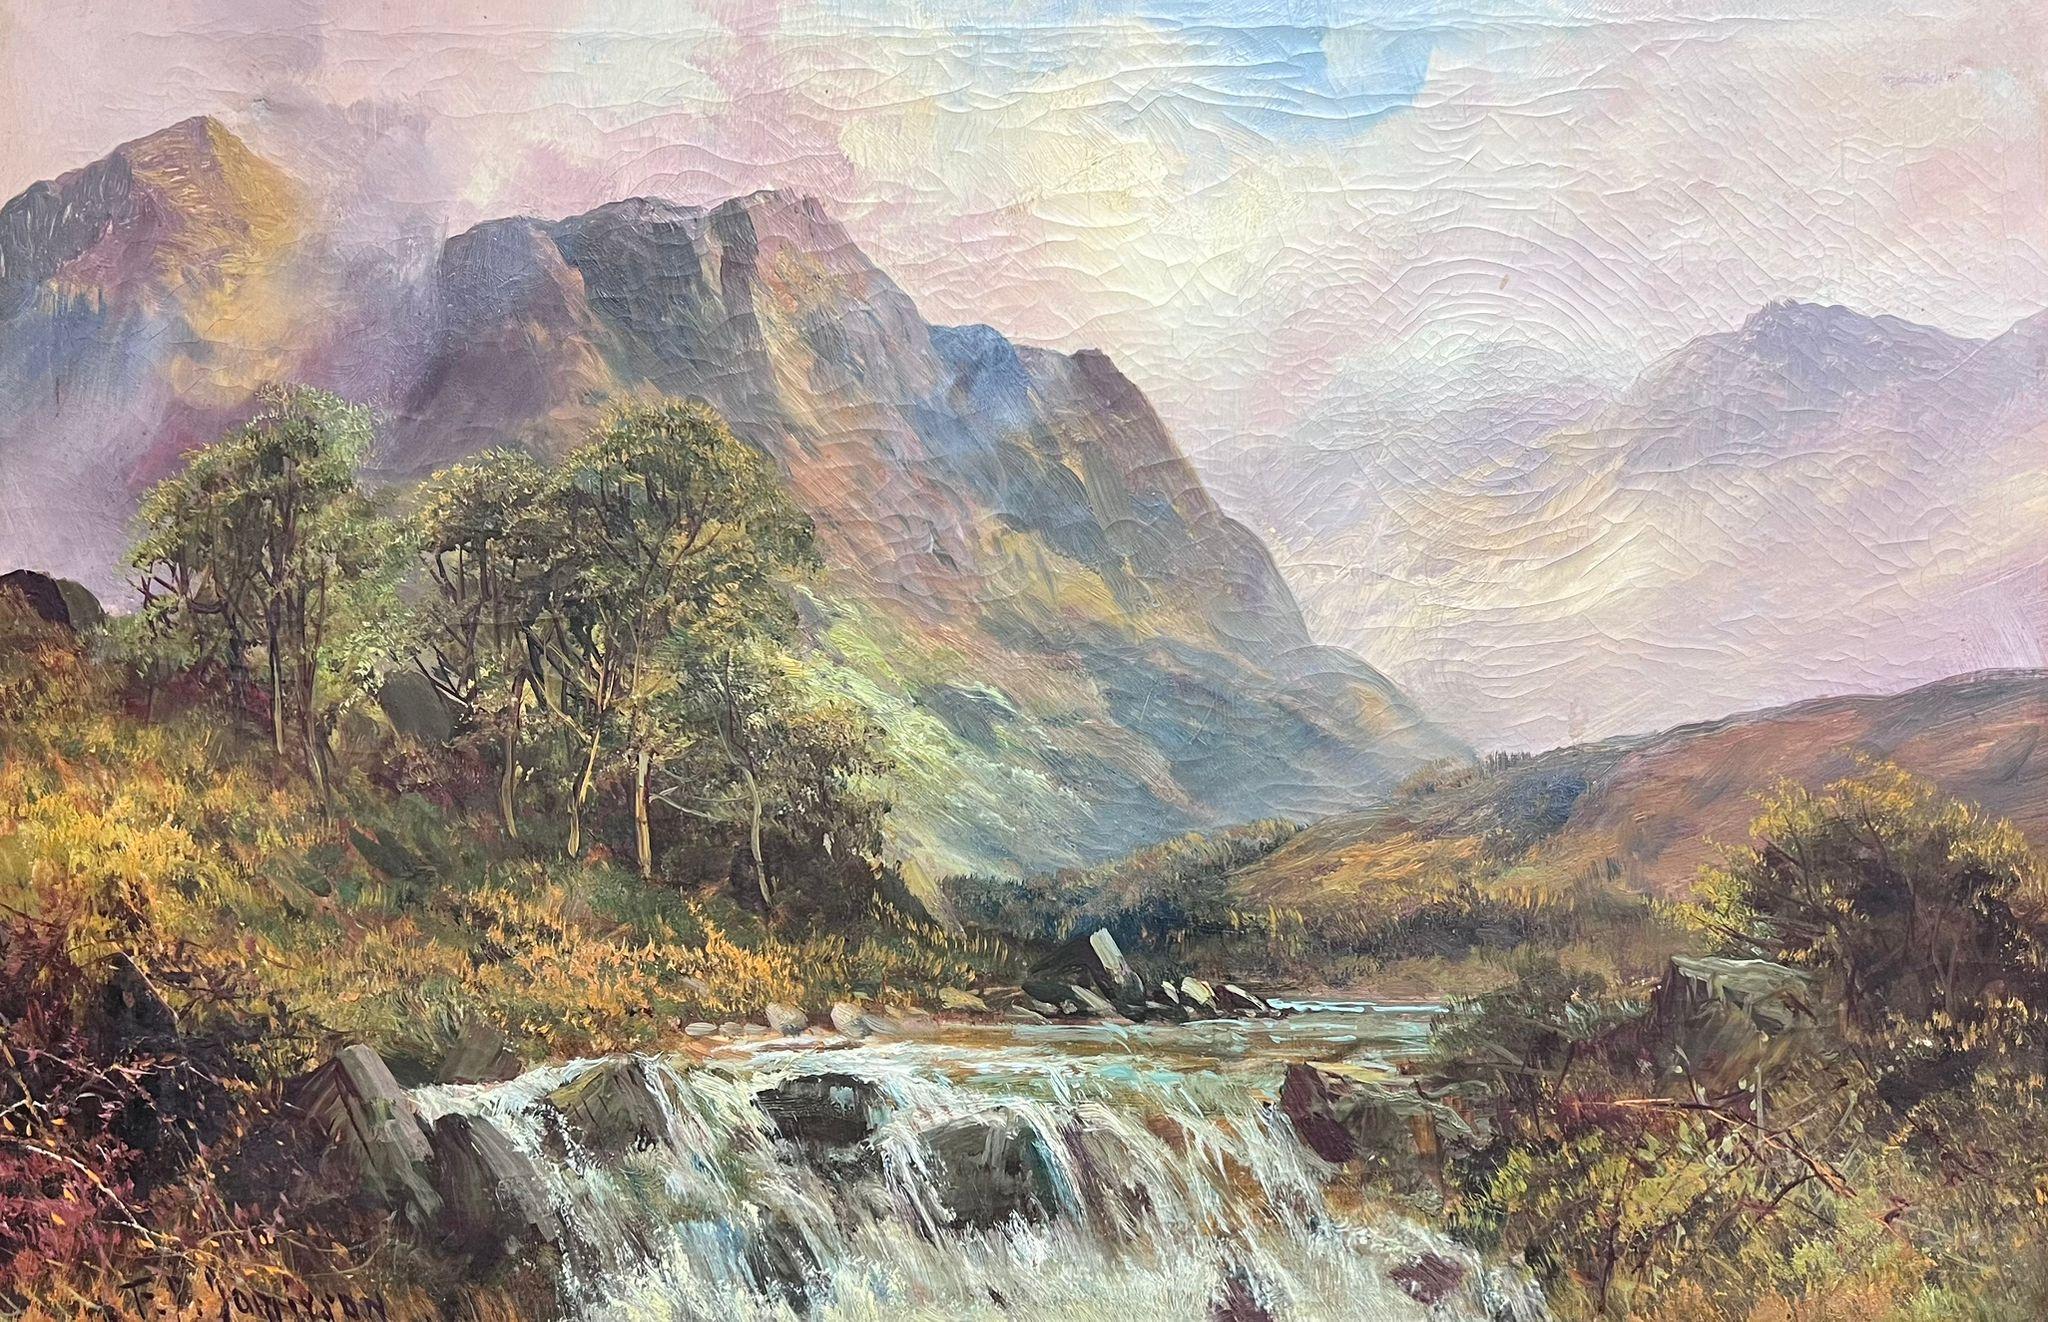 F. E. Jamieson Landscape Painting - Antique Scottish Highland Landscape Oil Painting Full Spate River in Mountains